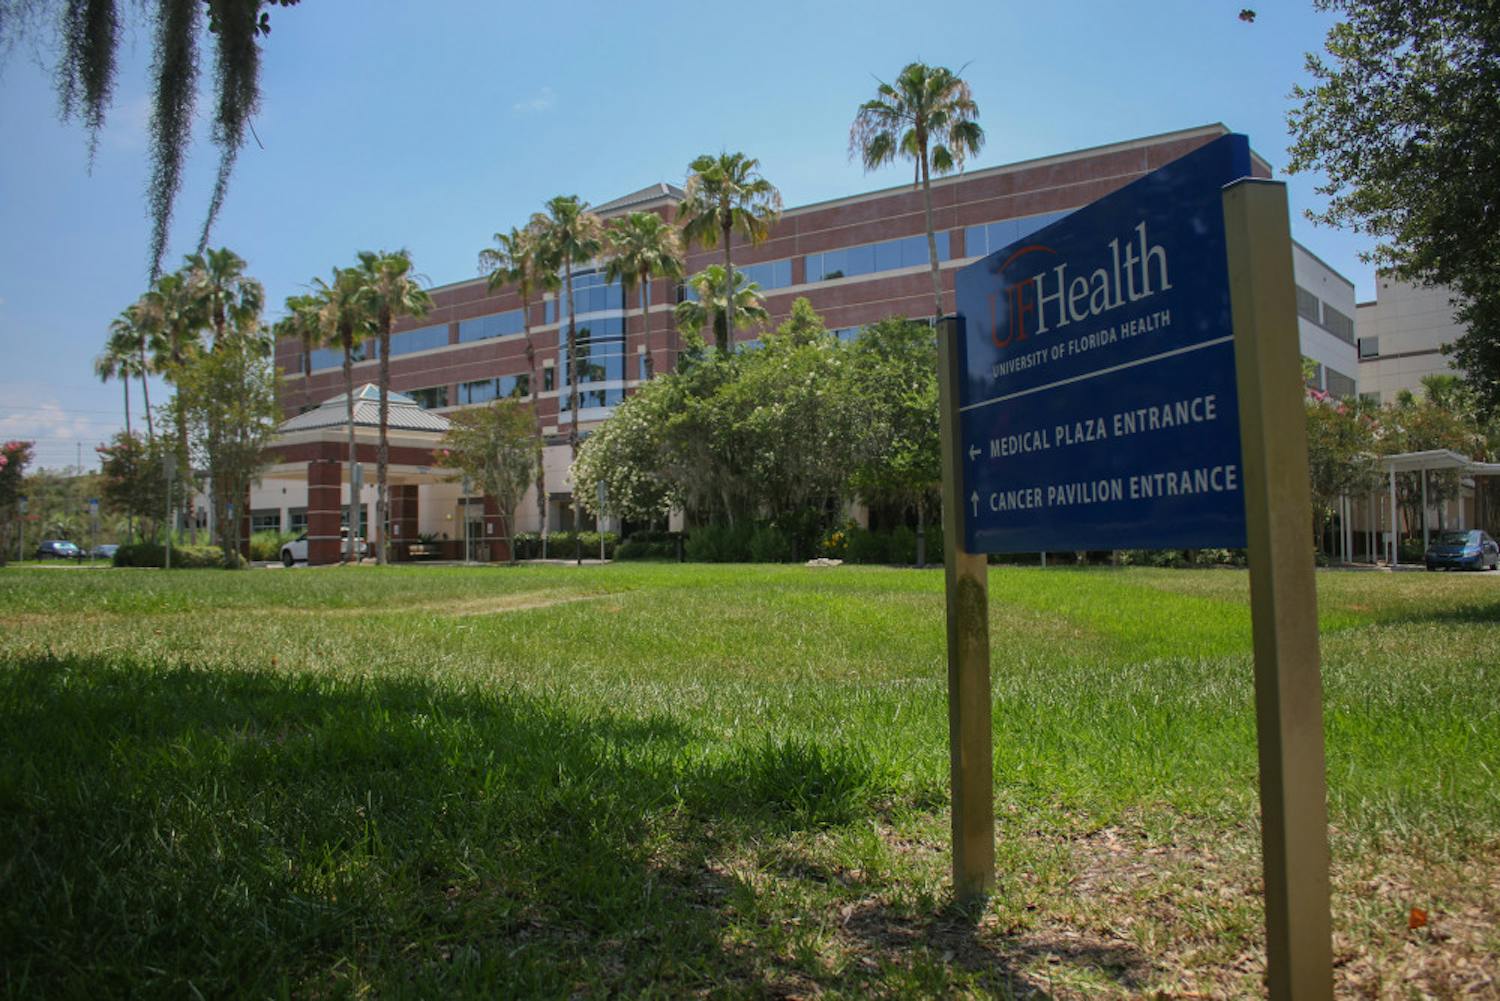 UF Health Family Medical Center opened in Bradford County on May 1.